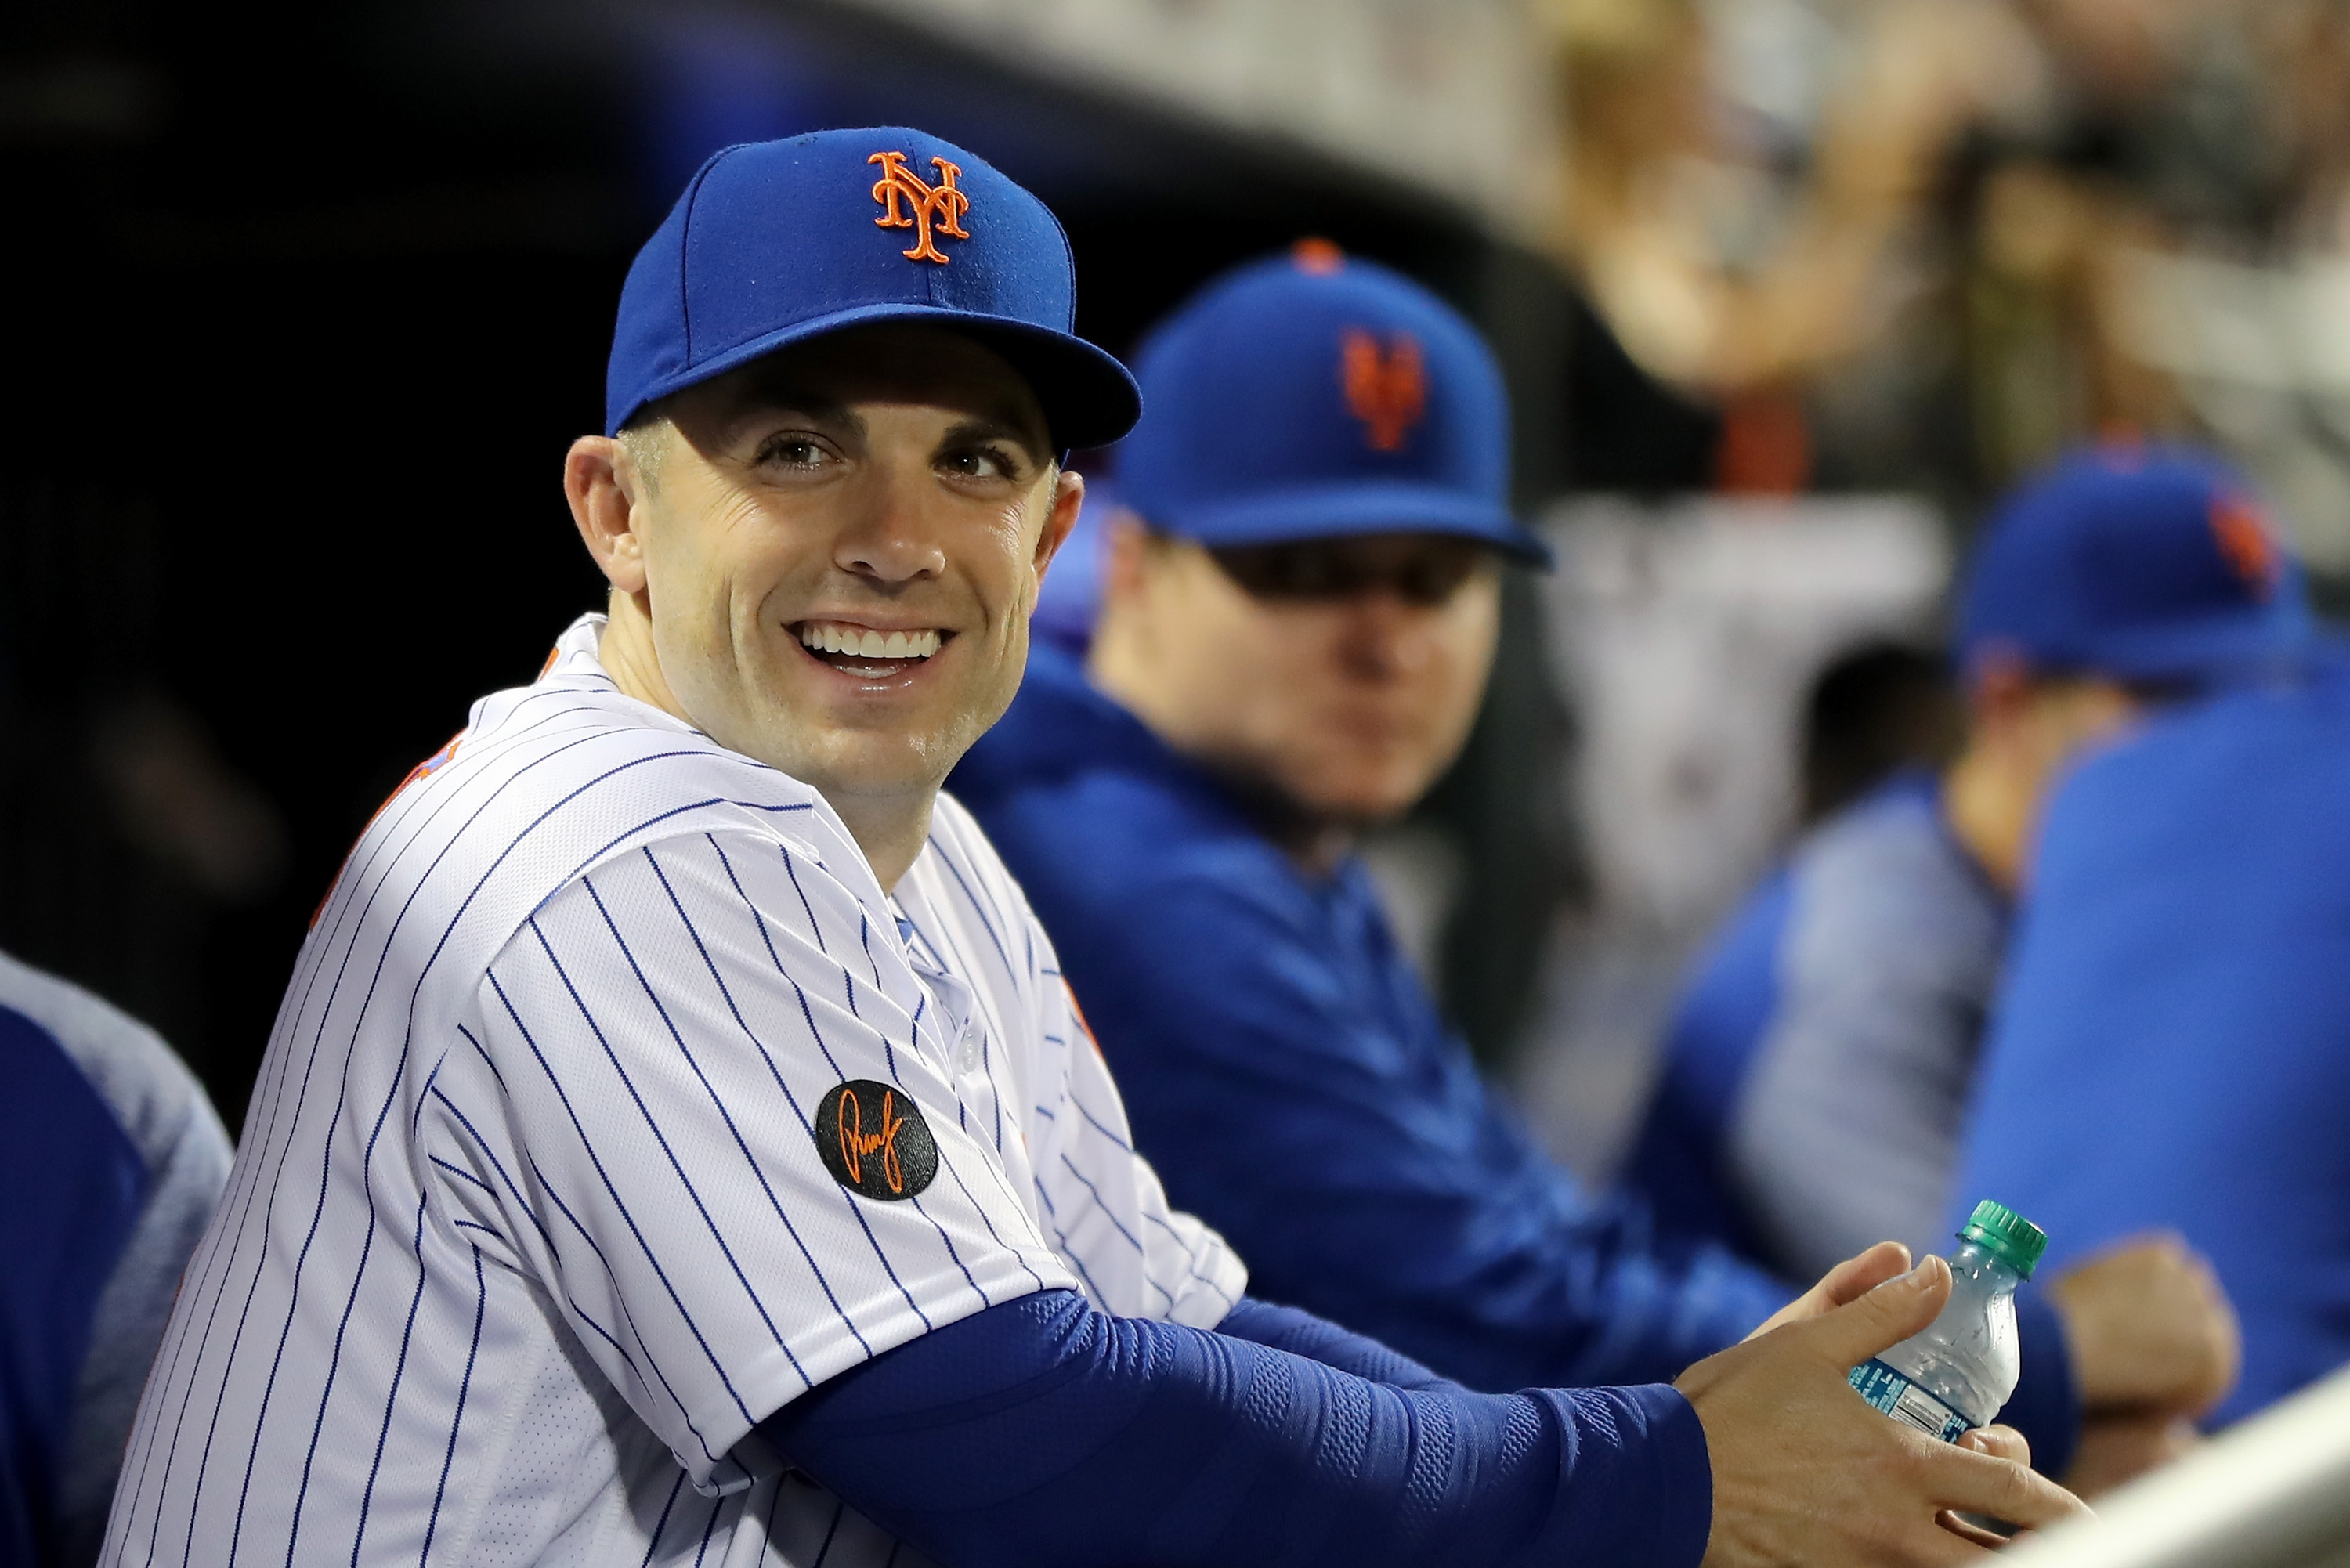 The Captain: Best moments of David Wright's MLB career